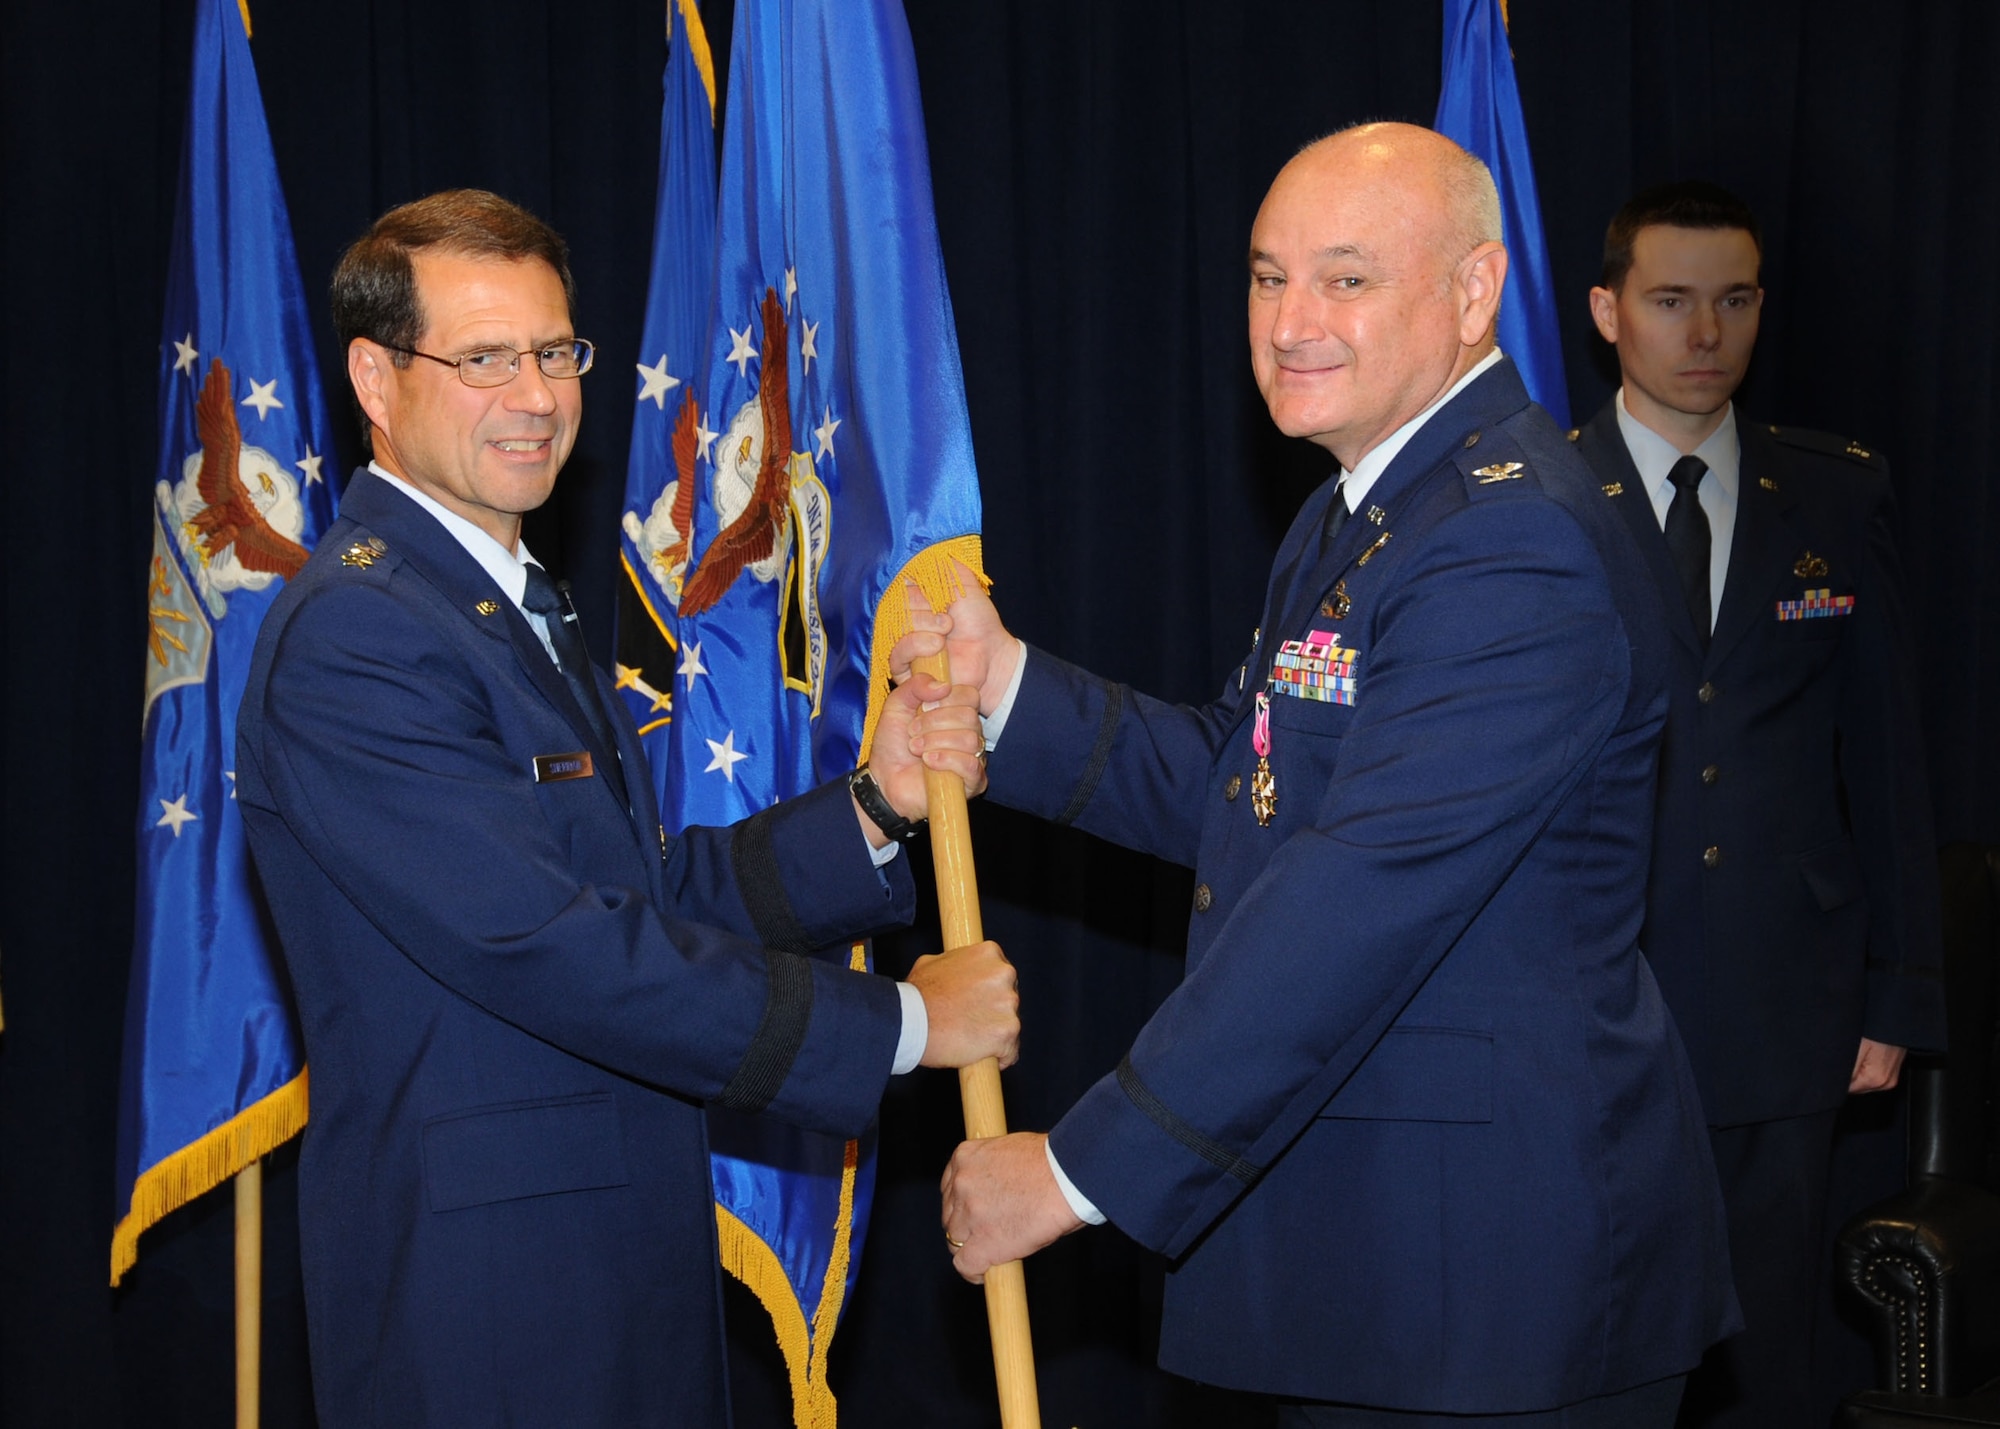 Colonel David Madden (right), Global Positioning Systems Wing, relinquishes command of the wing at a ceremony, June 18. The colonel is retiring from the Air Force but not leaving the Space and Missile Systems Center. As a civilian, he will assume command of the Military Satellite Communications Systems Wing next month.  (Photo by Lou Hernandez)